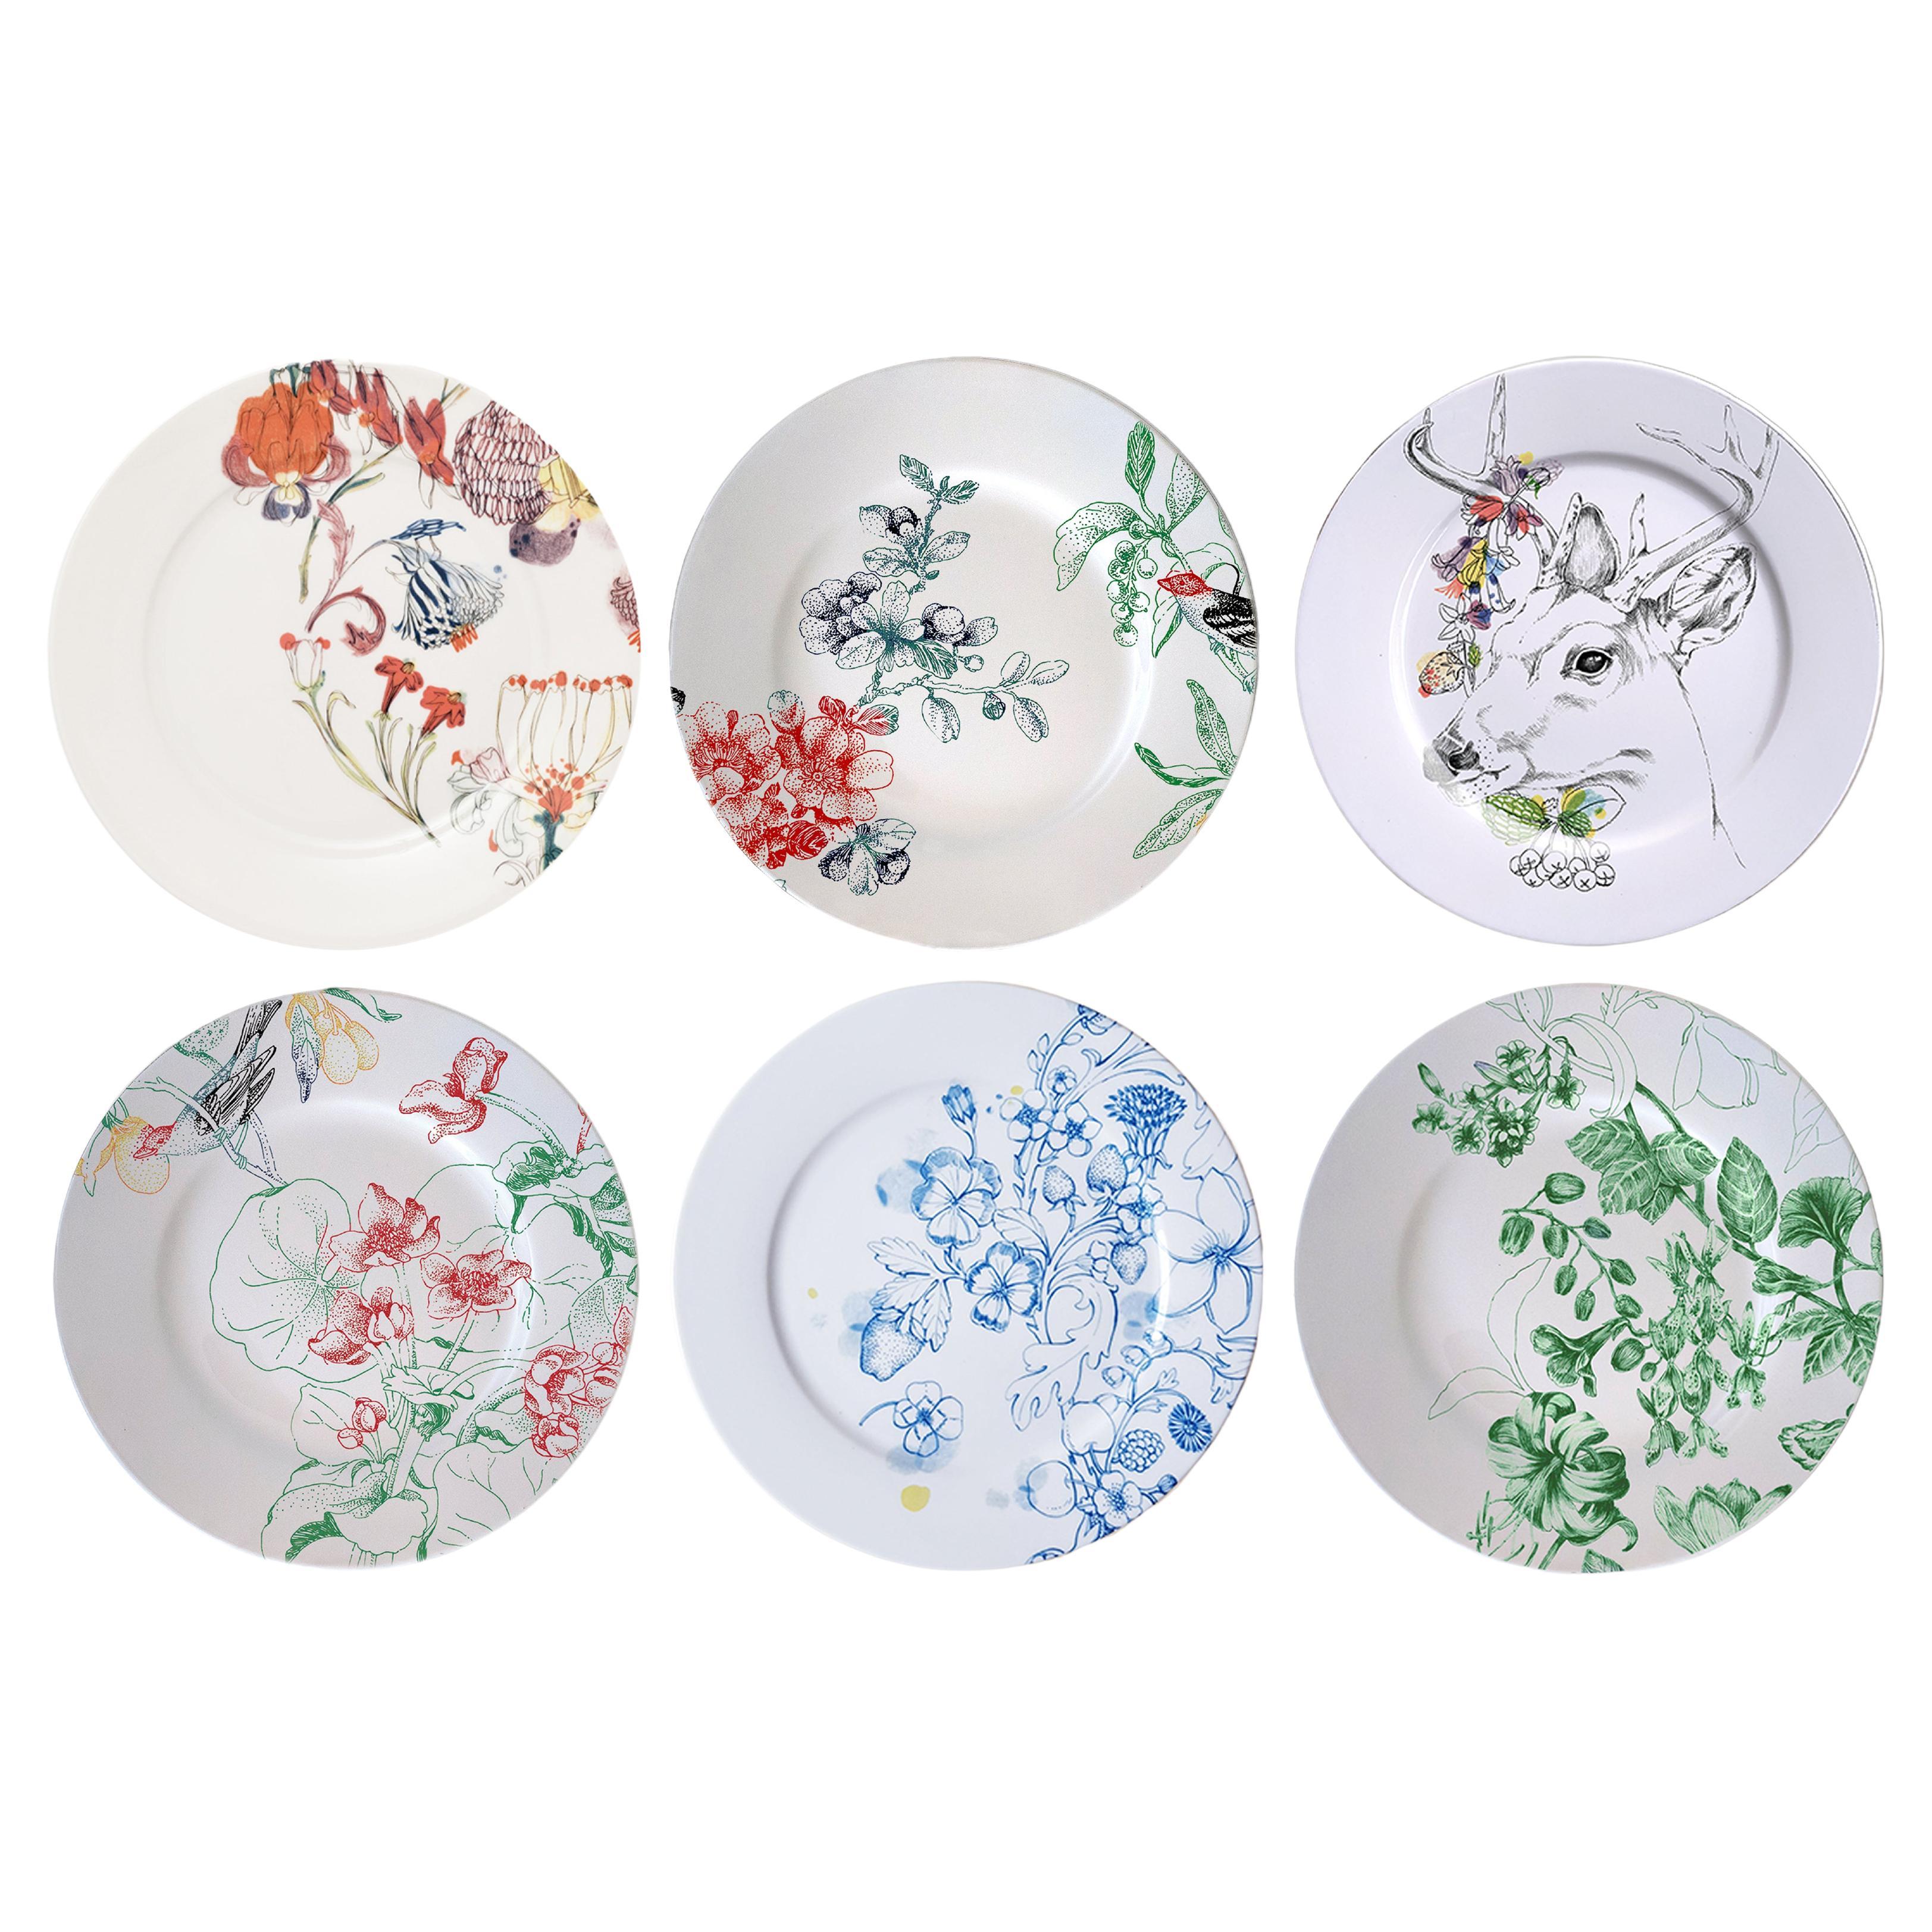 Mix & Match, Six Contemporary Porcelain Dinner Plates with Flowers and Animals For Sale